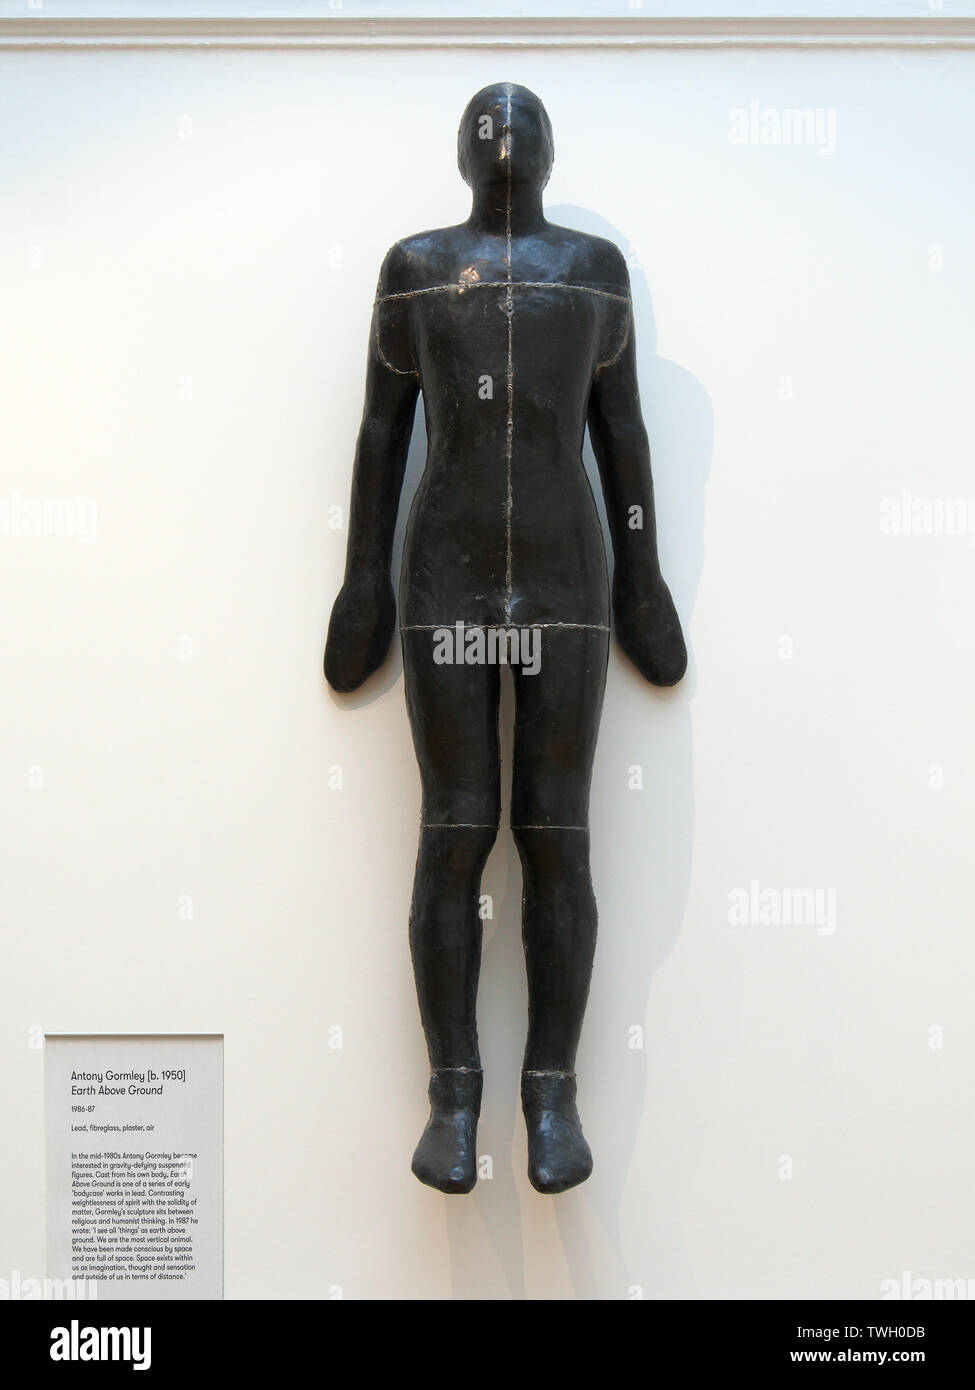 Antony Gormley statue 'Earth above Ground' hung on the wall in Leeds Art Gallery, Yorkshire, England, UK. Stock Photo